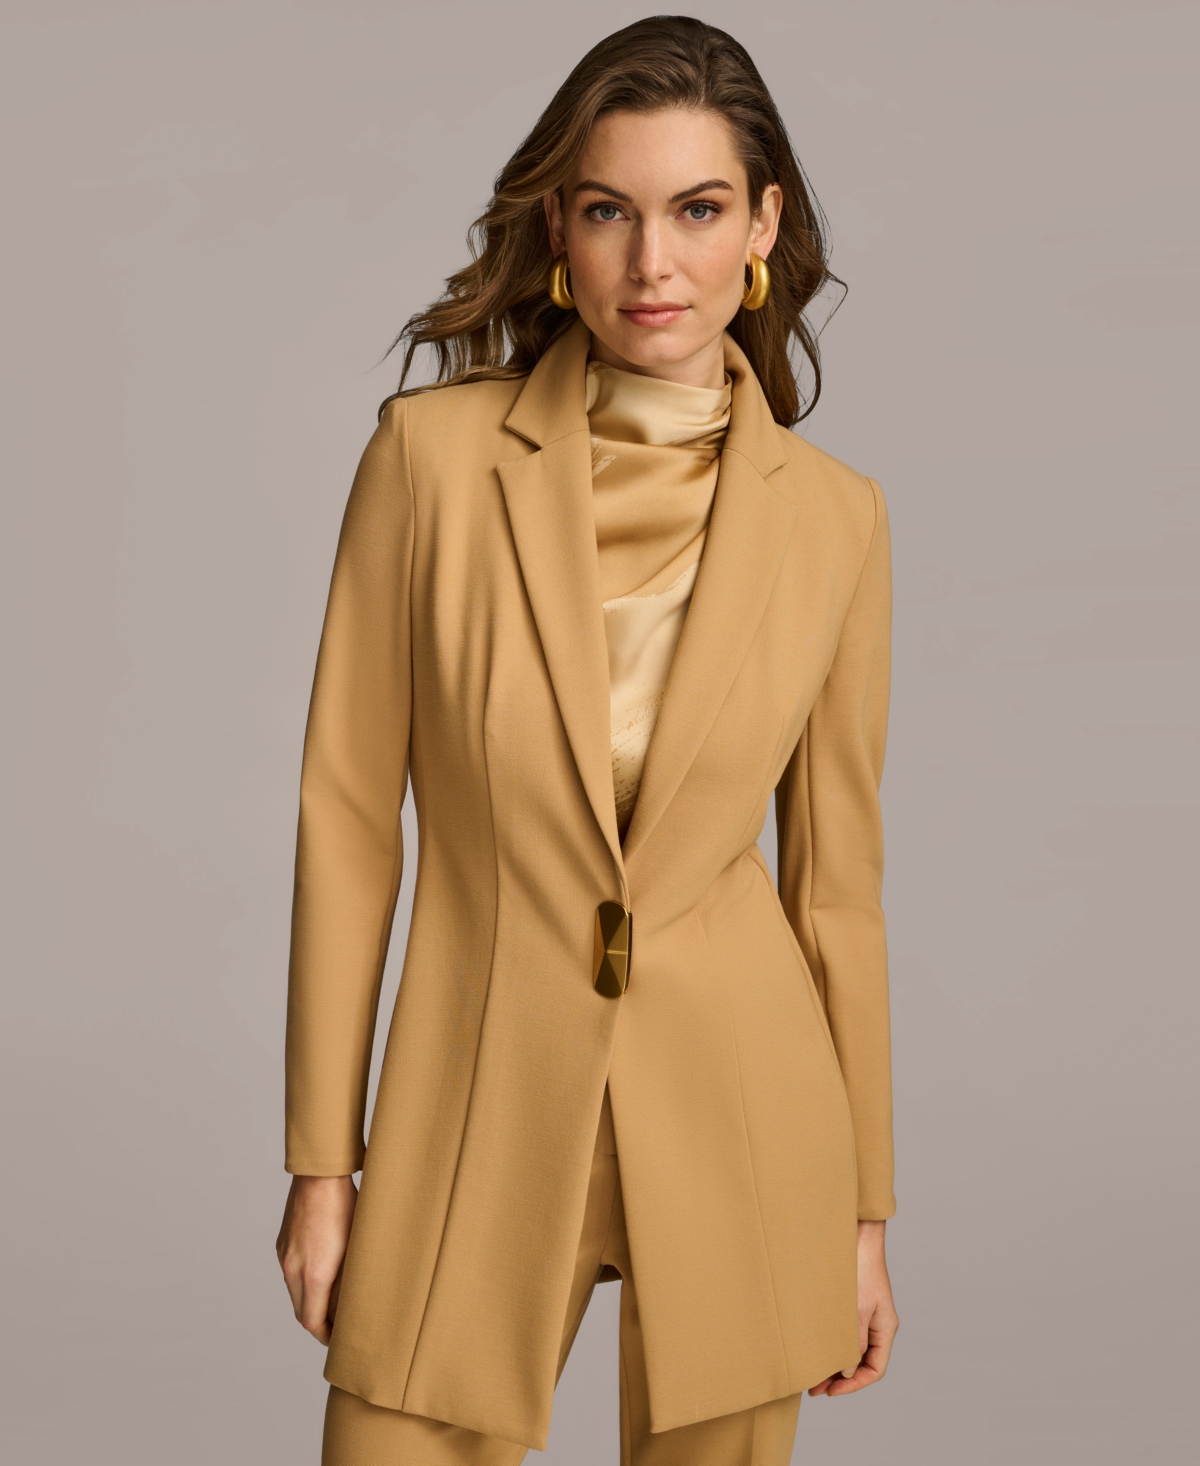 Women's One Button Topper Jacket - Fawn